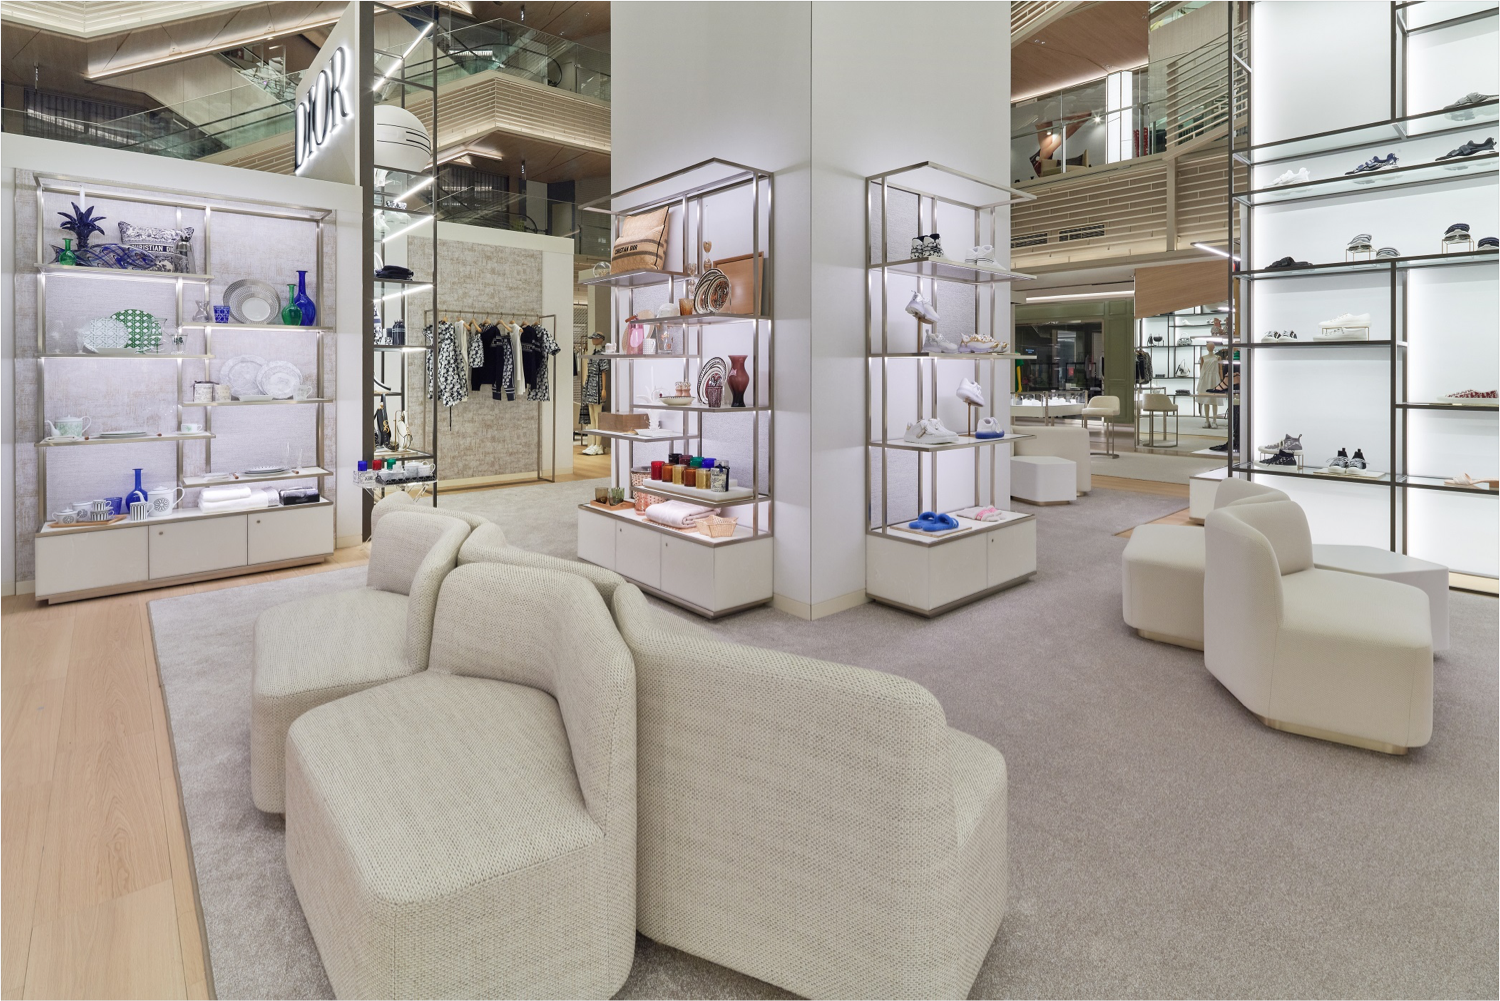 Dior takes its Maison concept to Tokyo: opens pop-up in Isetan department  store